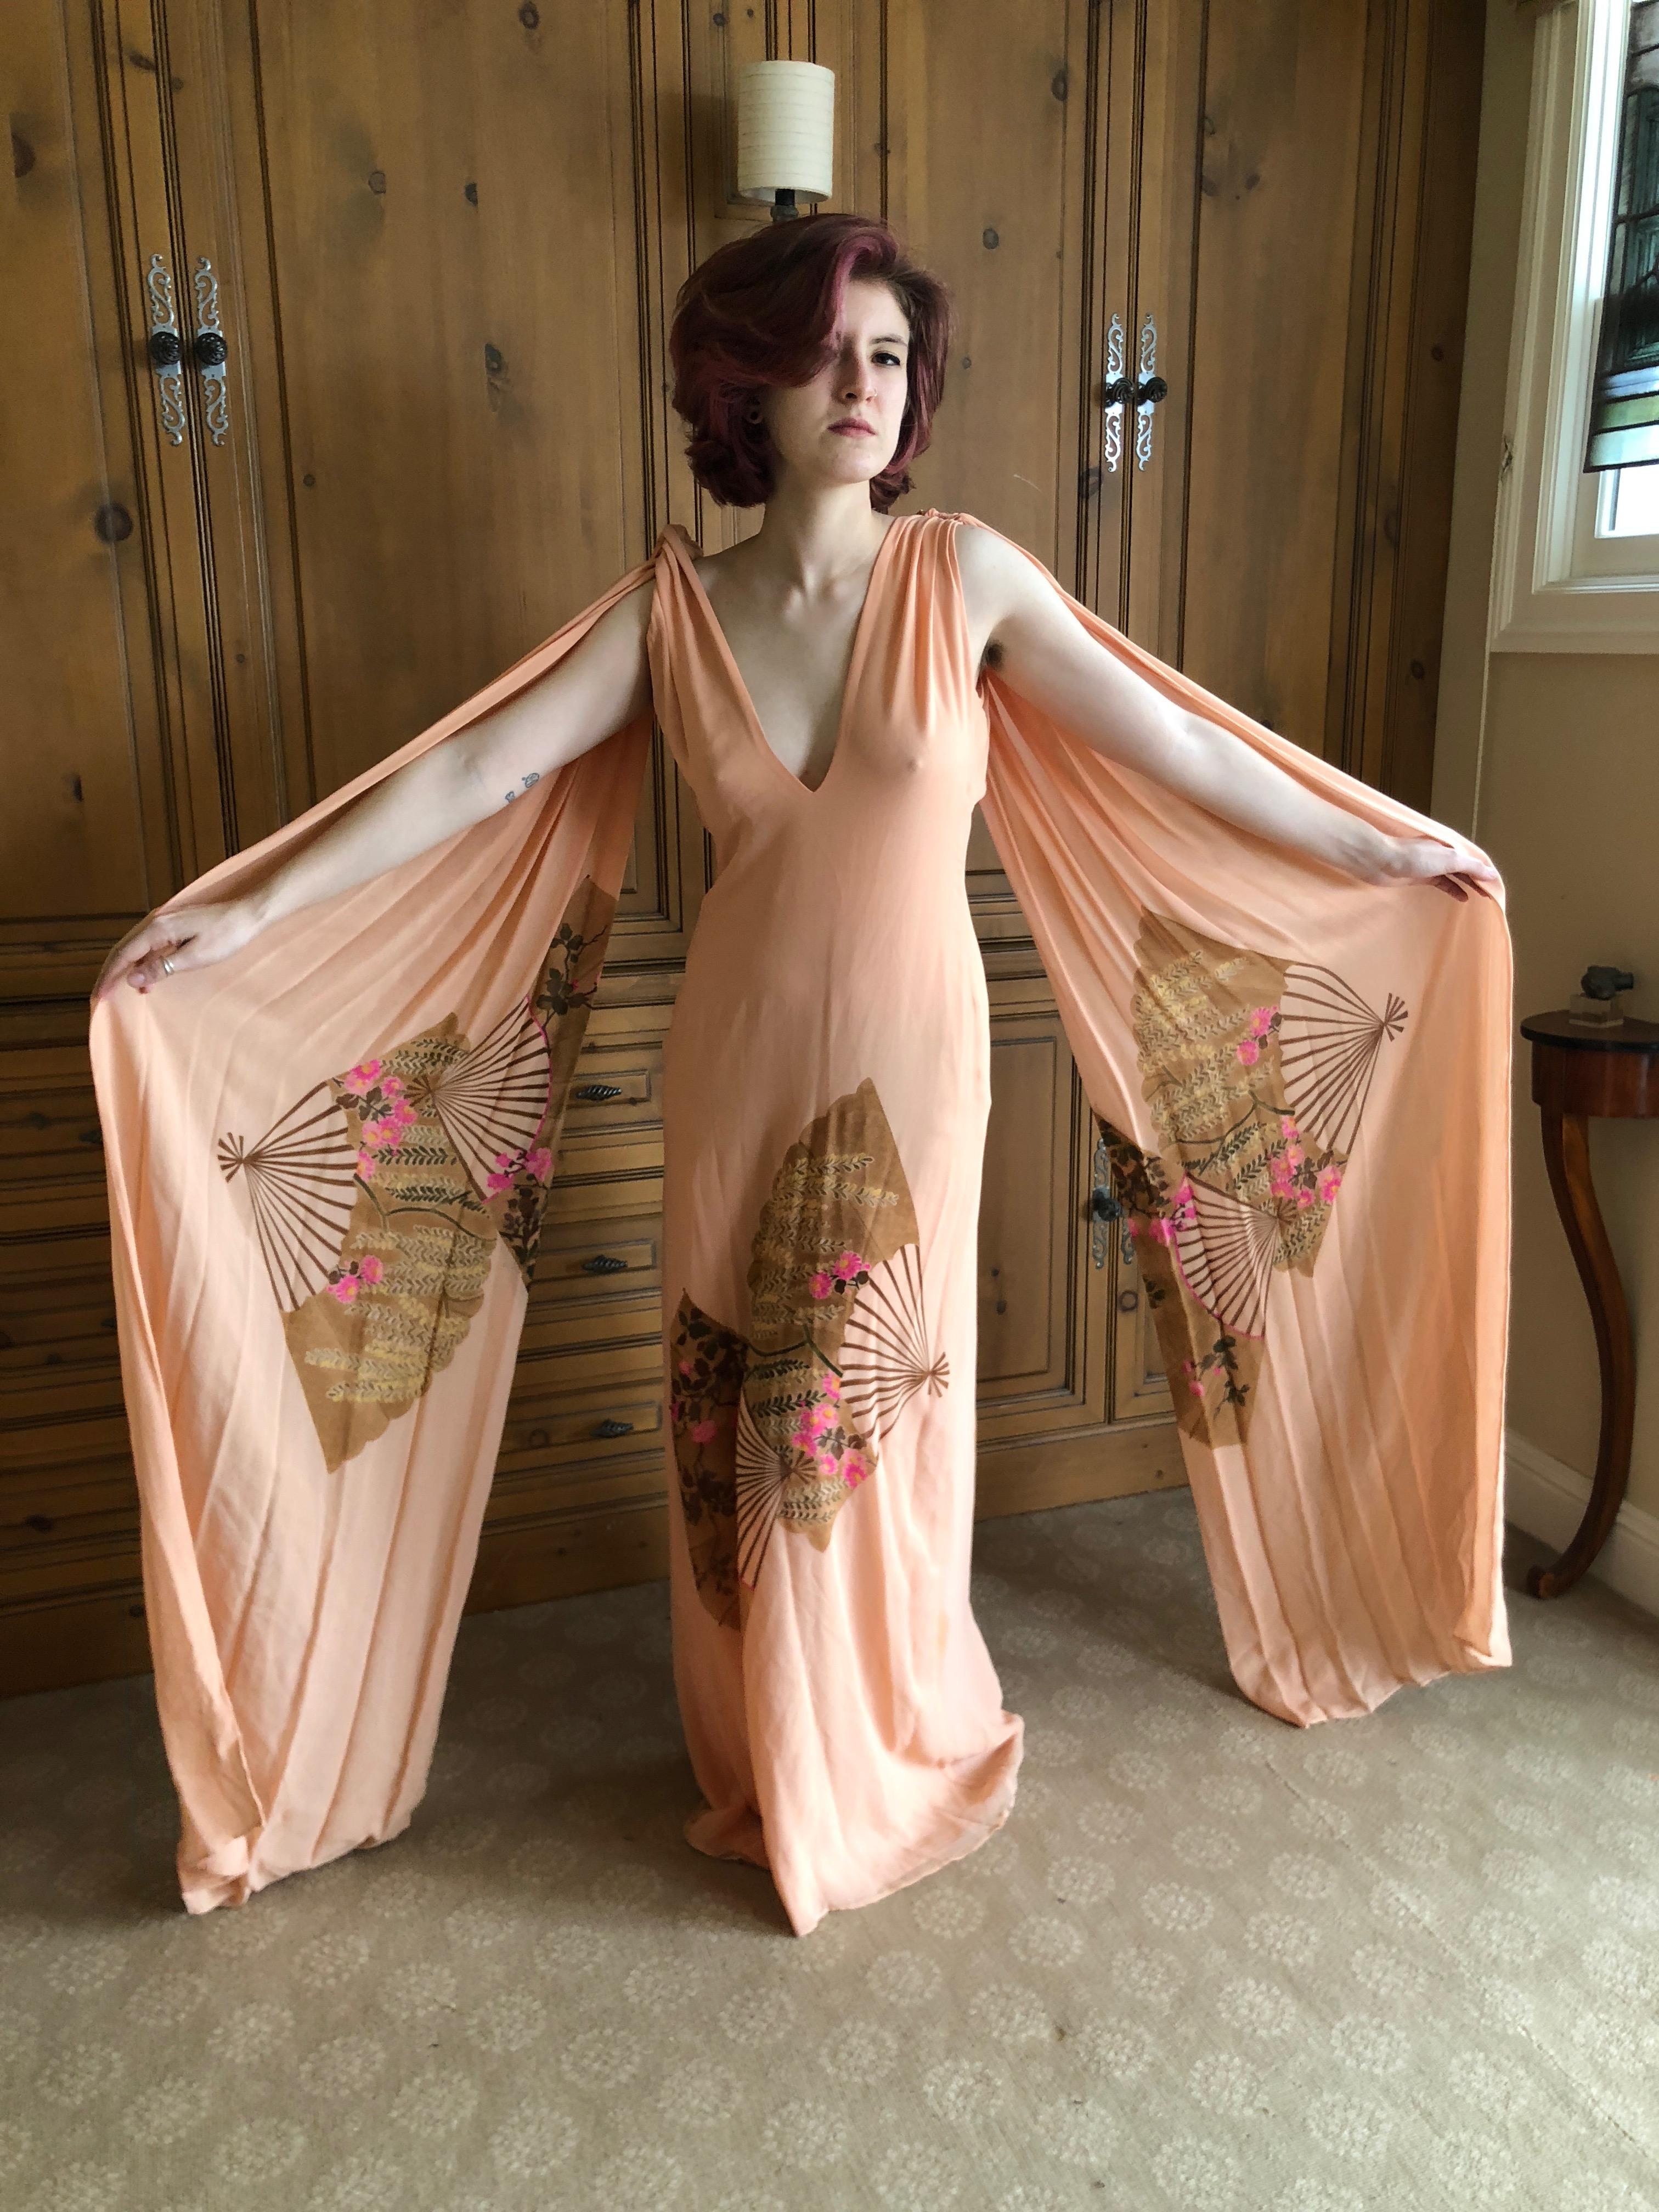 Cardinali Butterfly Pattern Evening Dress with Dramatic Draped Shoulder Capes  In Good Condition For Sale In Cloverdale, CA